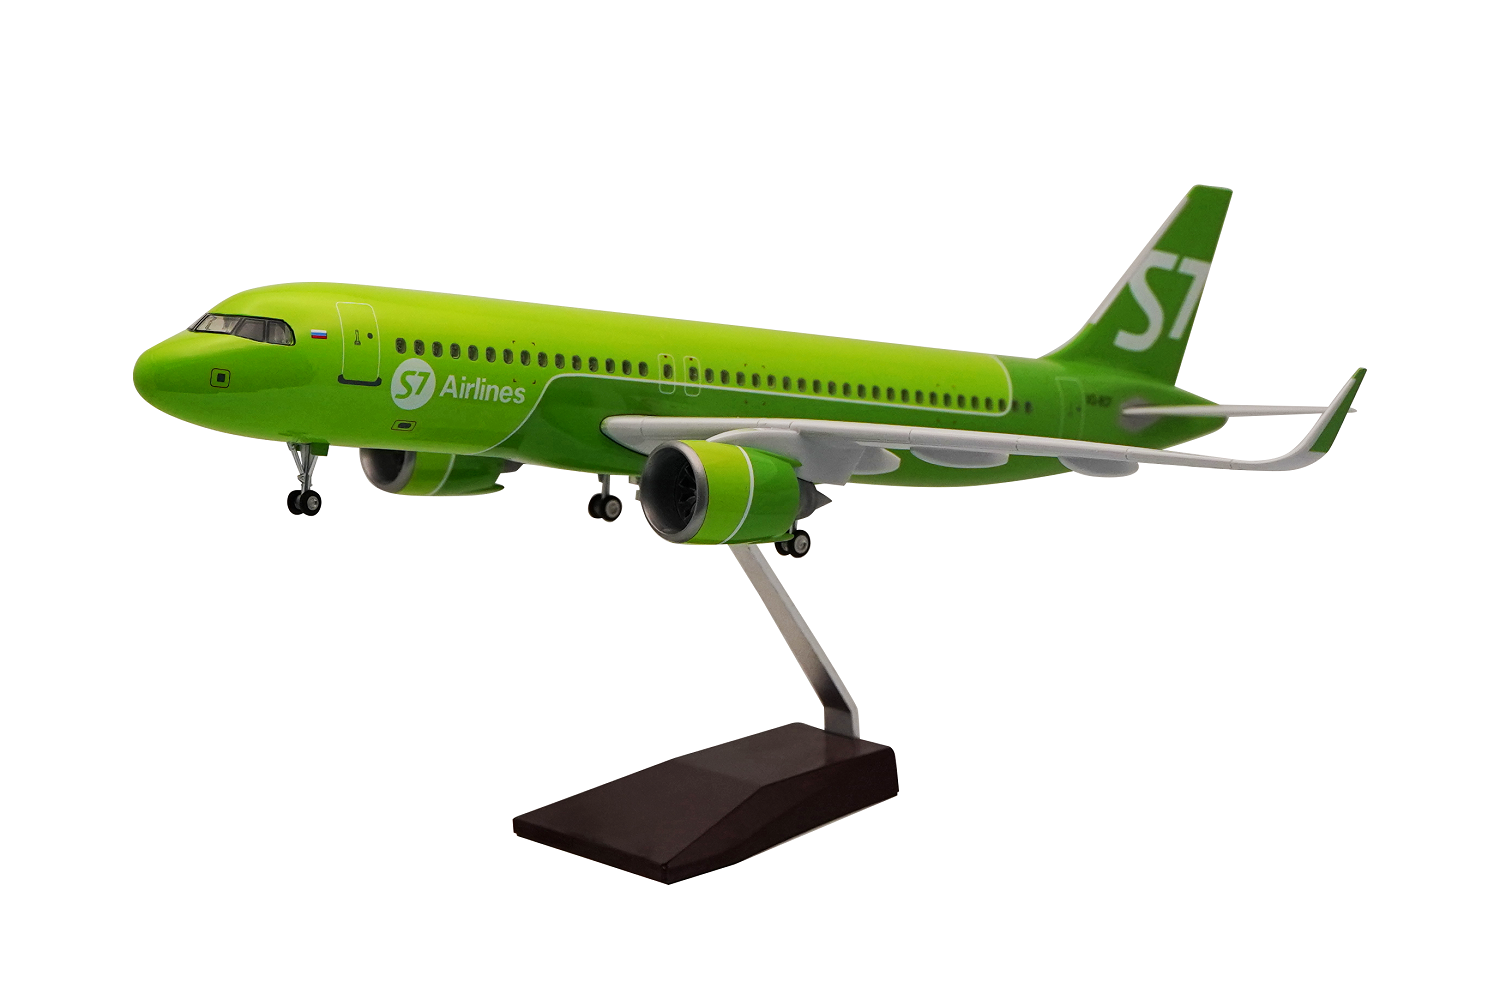   Airbus A320 Neo,  S7 Airlines .    .  # 19 hobbyplus.ru